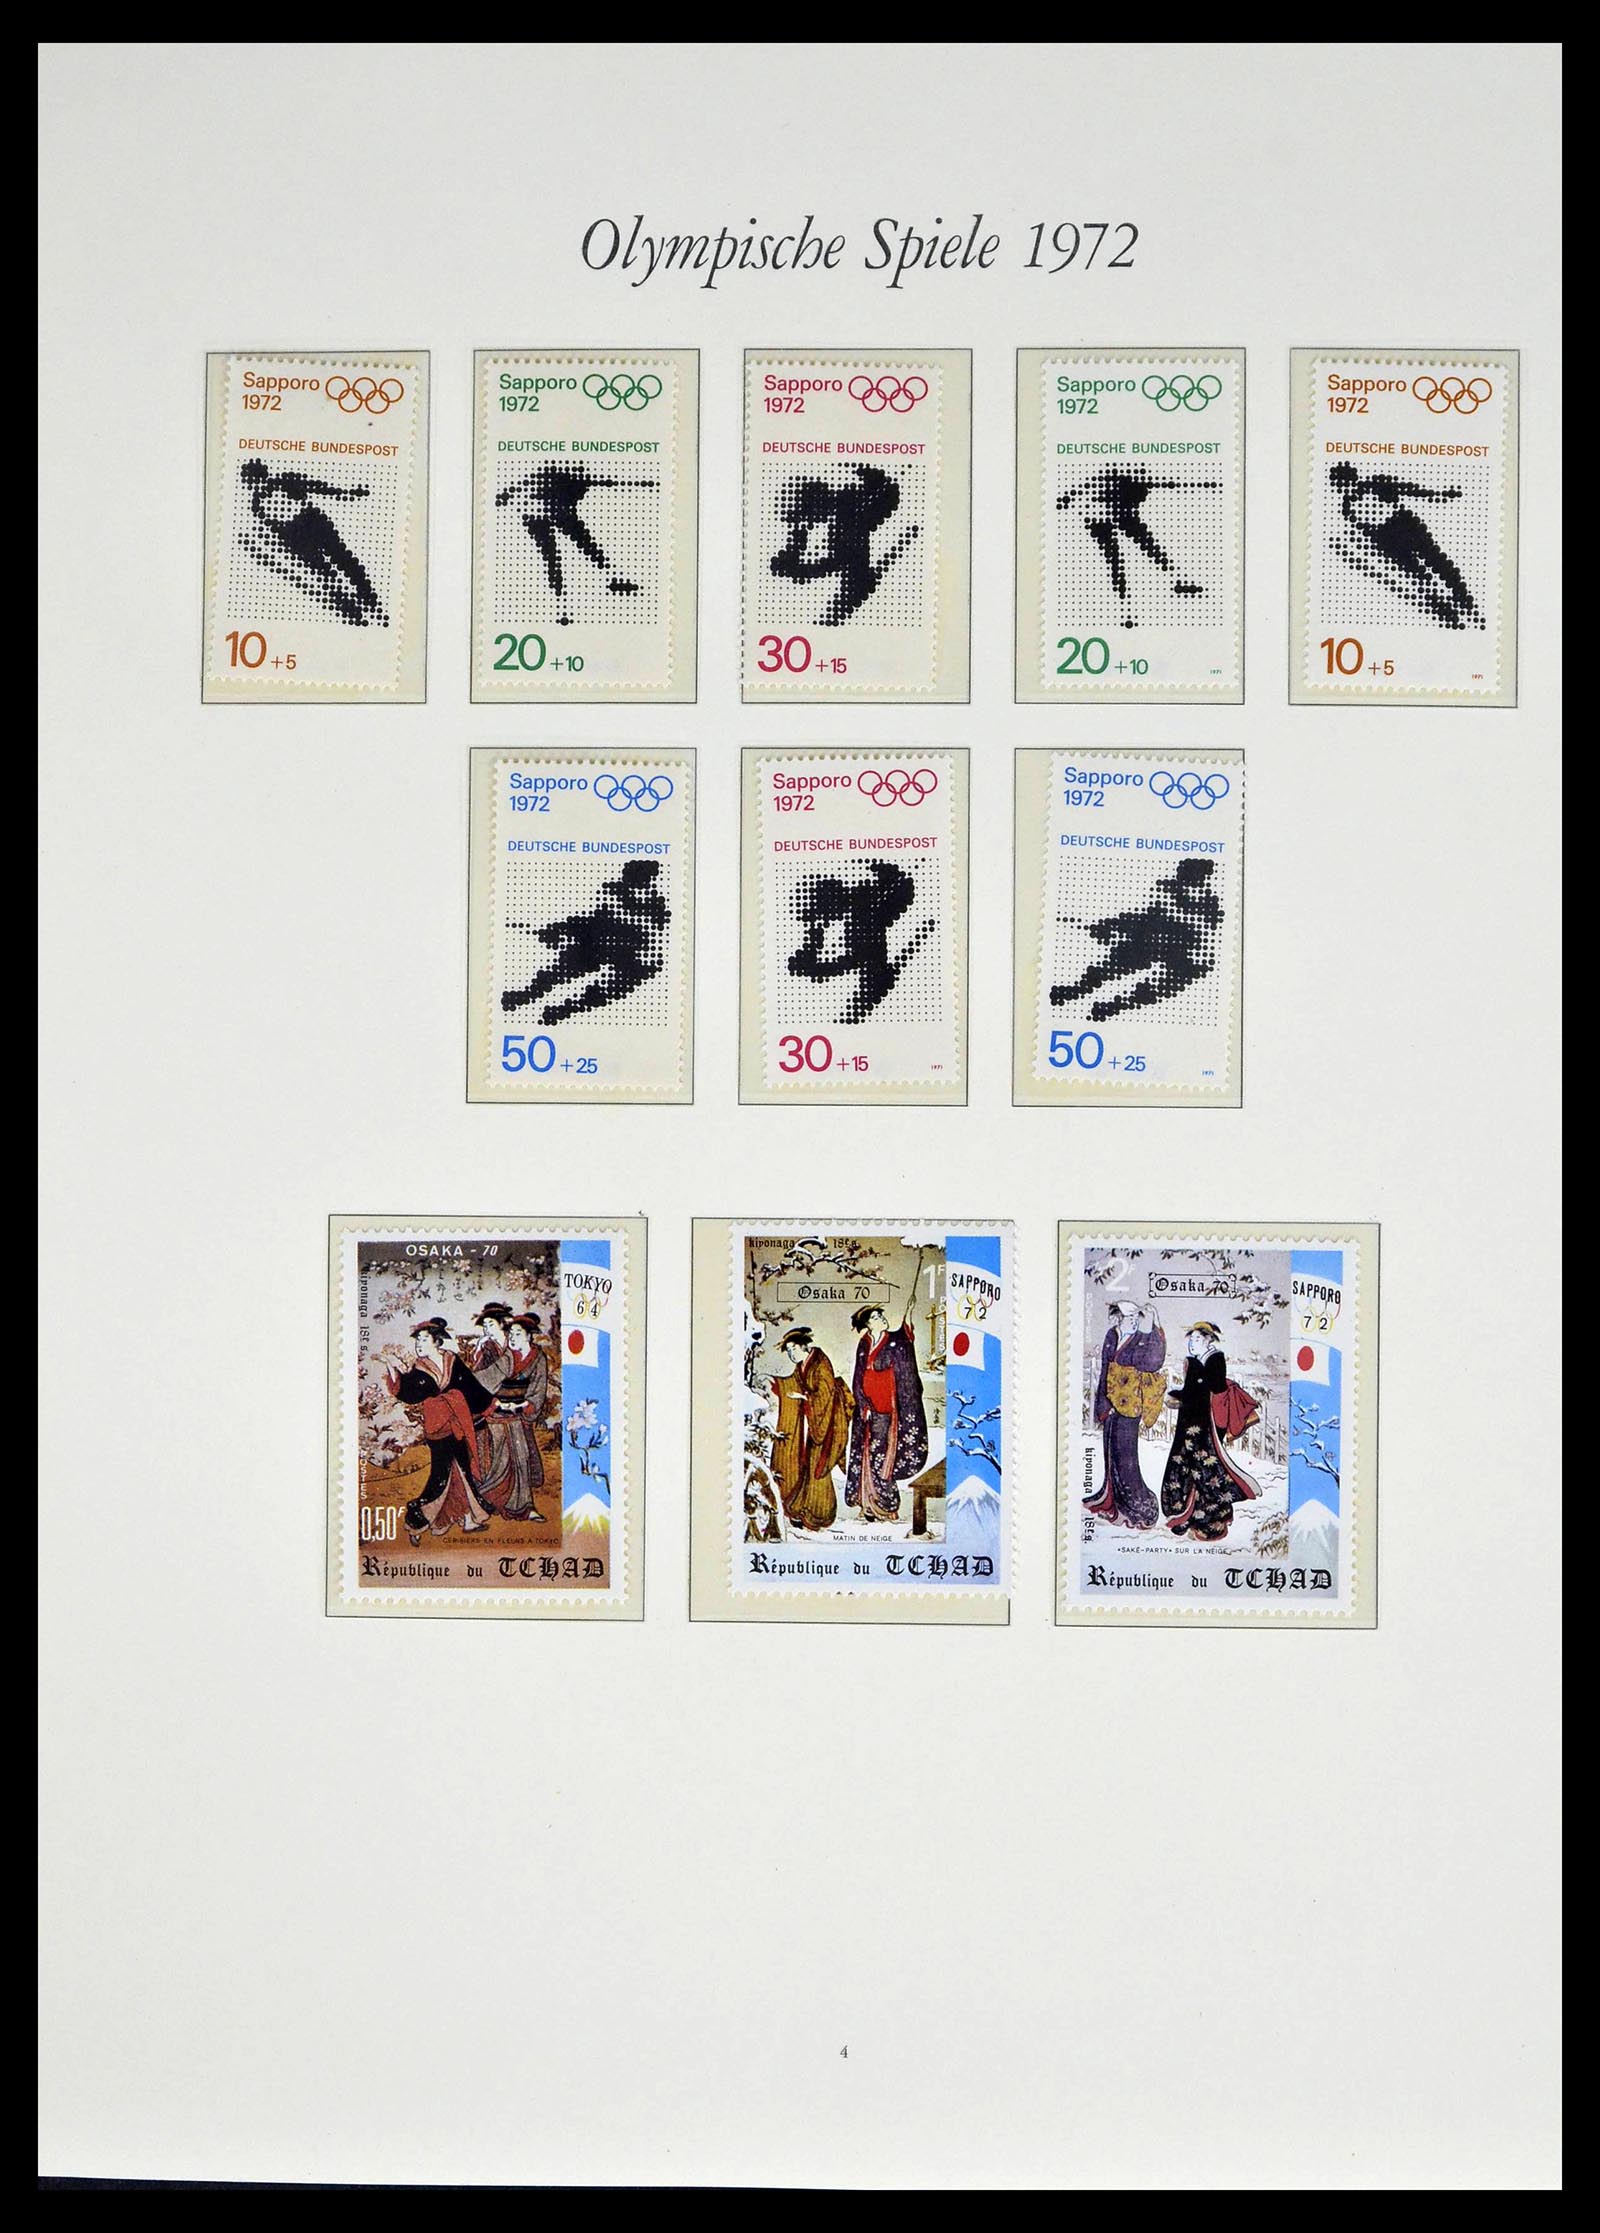 39237 0064 - Stamp collection 39237 Olympics 1972.